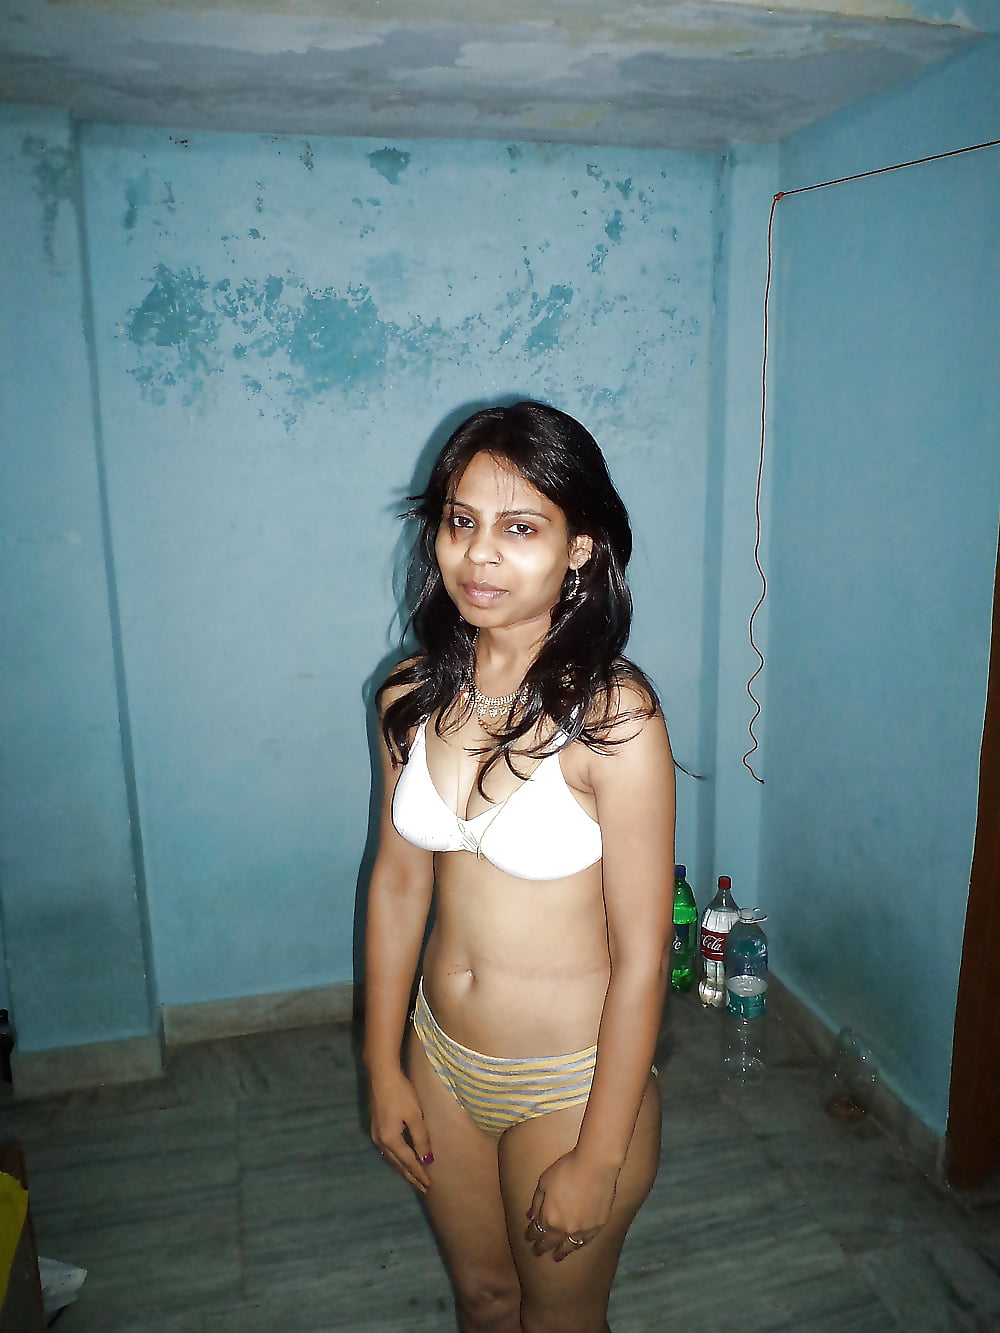 Newly married wife exposed nude photos picture